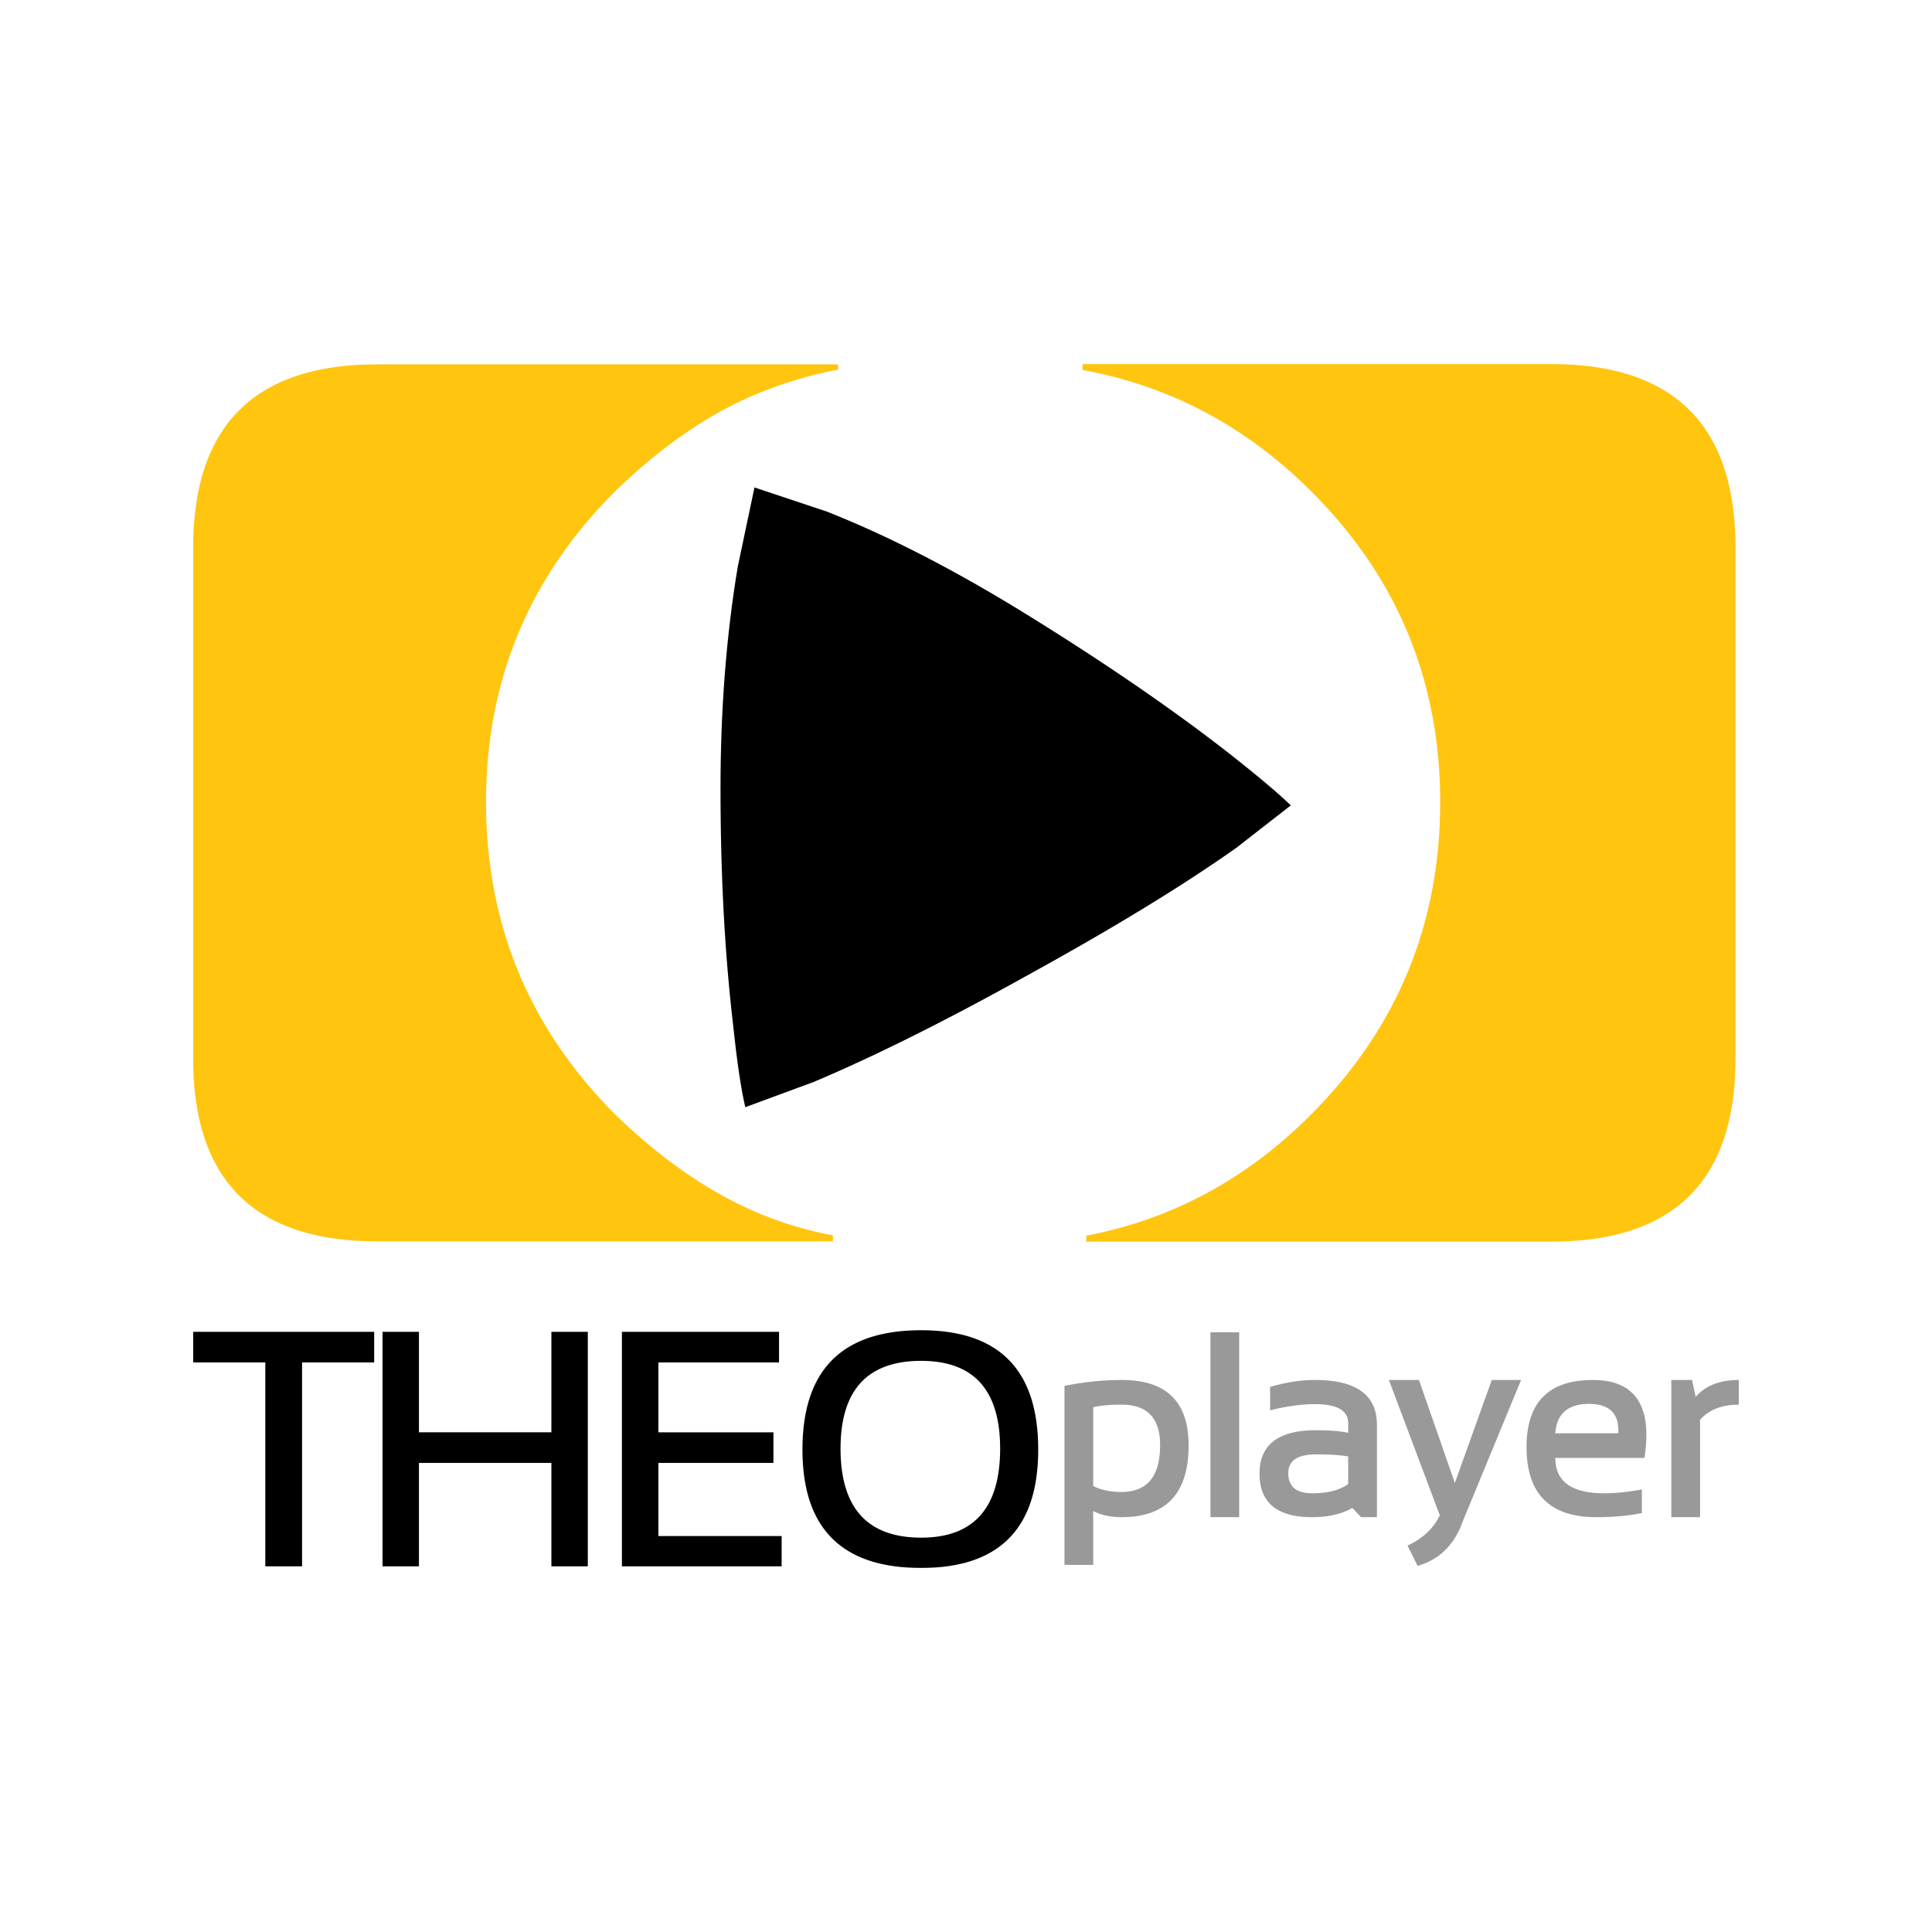 THEOplayer logo